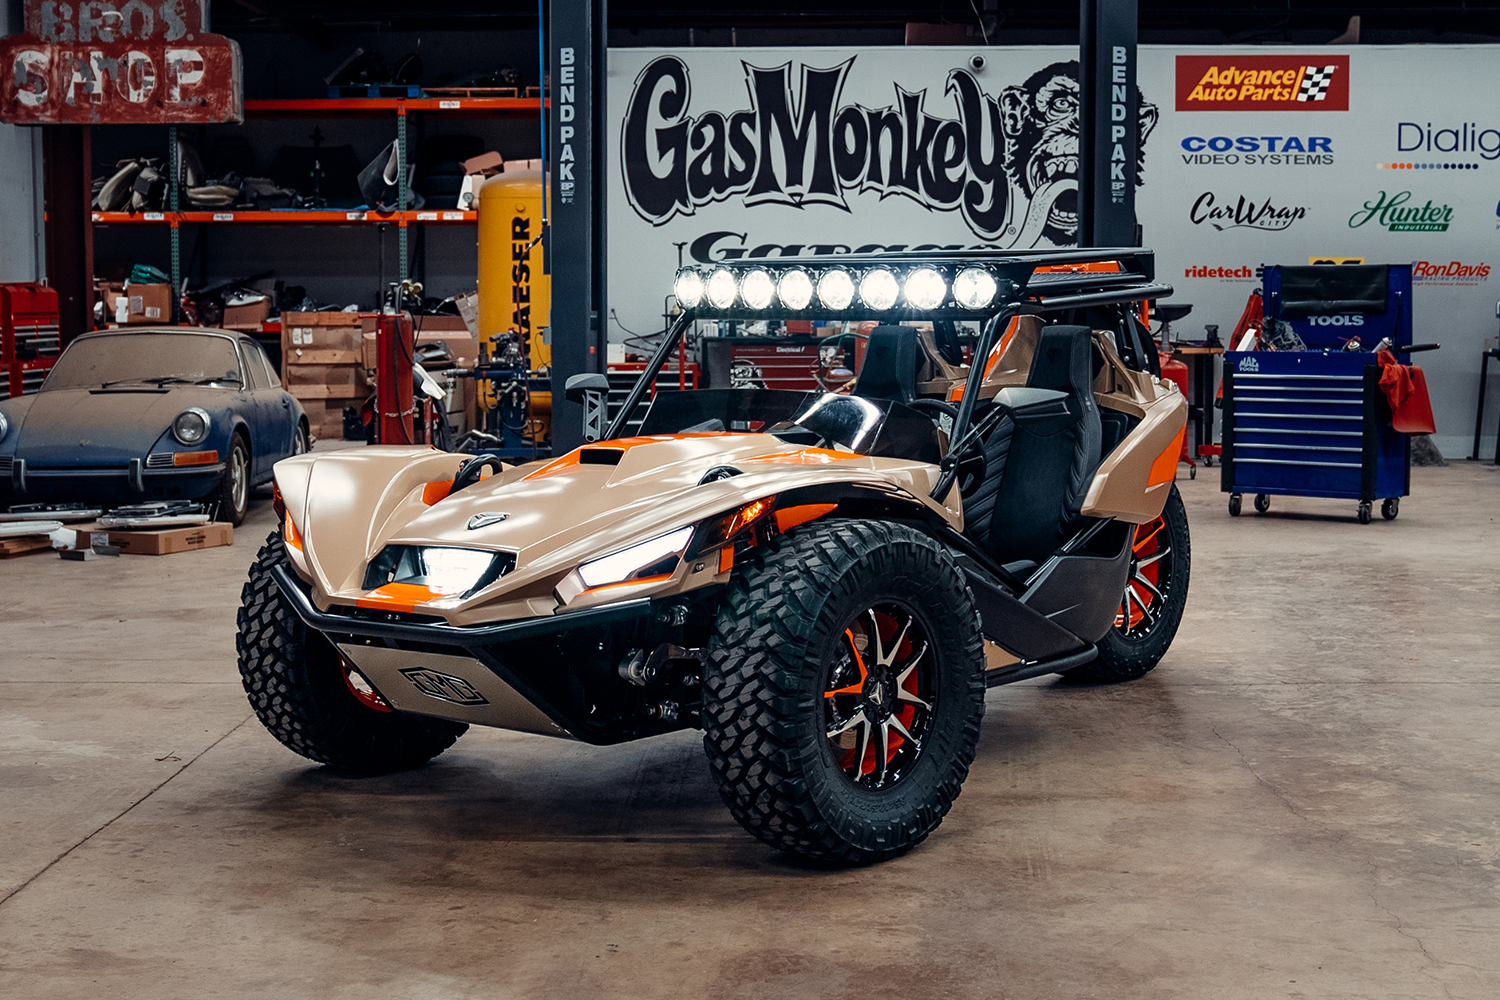 The Urban Assault Polaris Slingshot in the Gas Monkey Garage built by Richard Rawlings's team for SEMA 2021. The three-wheeler features a number of custom elements.